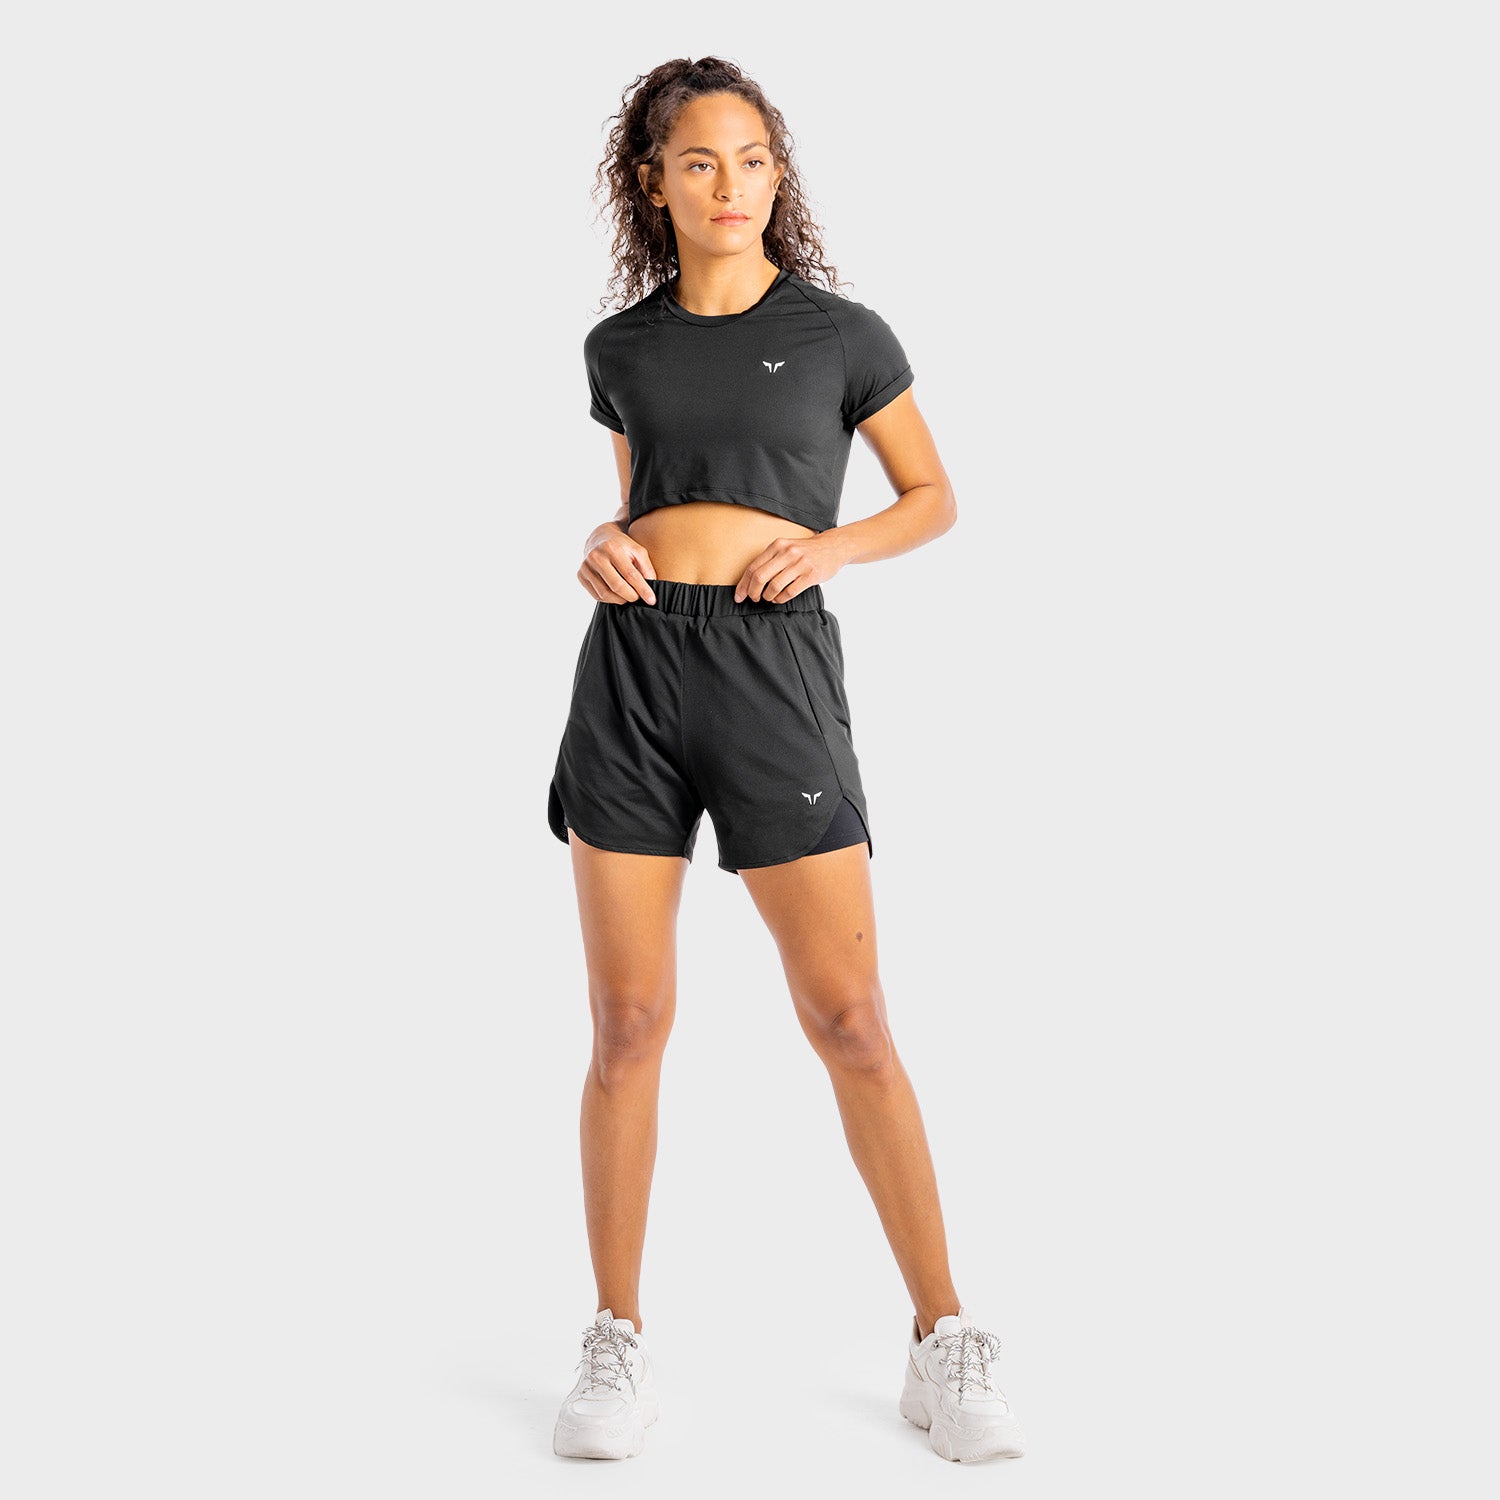 squatwolf-workout-clothes-core-2-in-1-shorts-black-gym-shorts-for-women